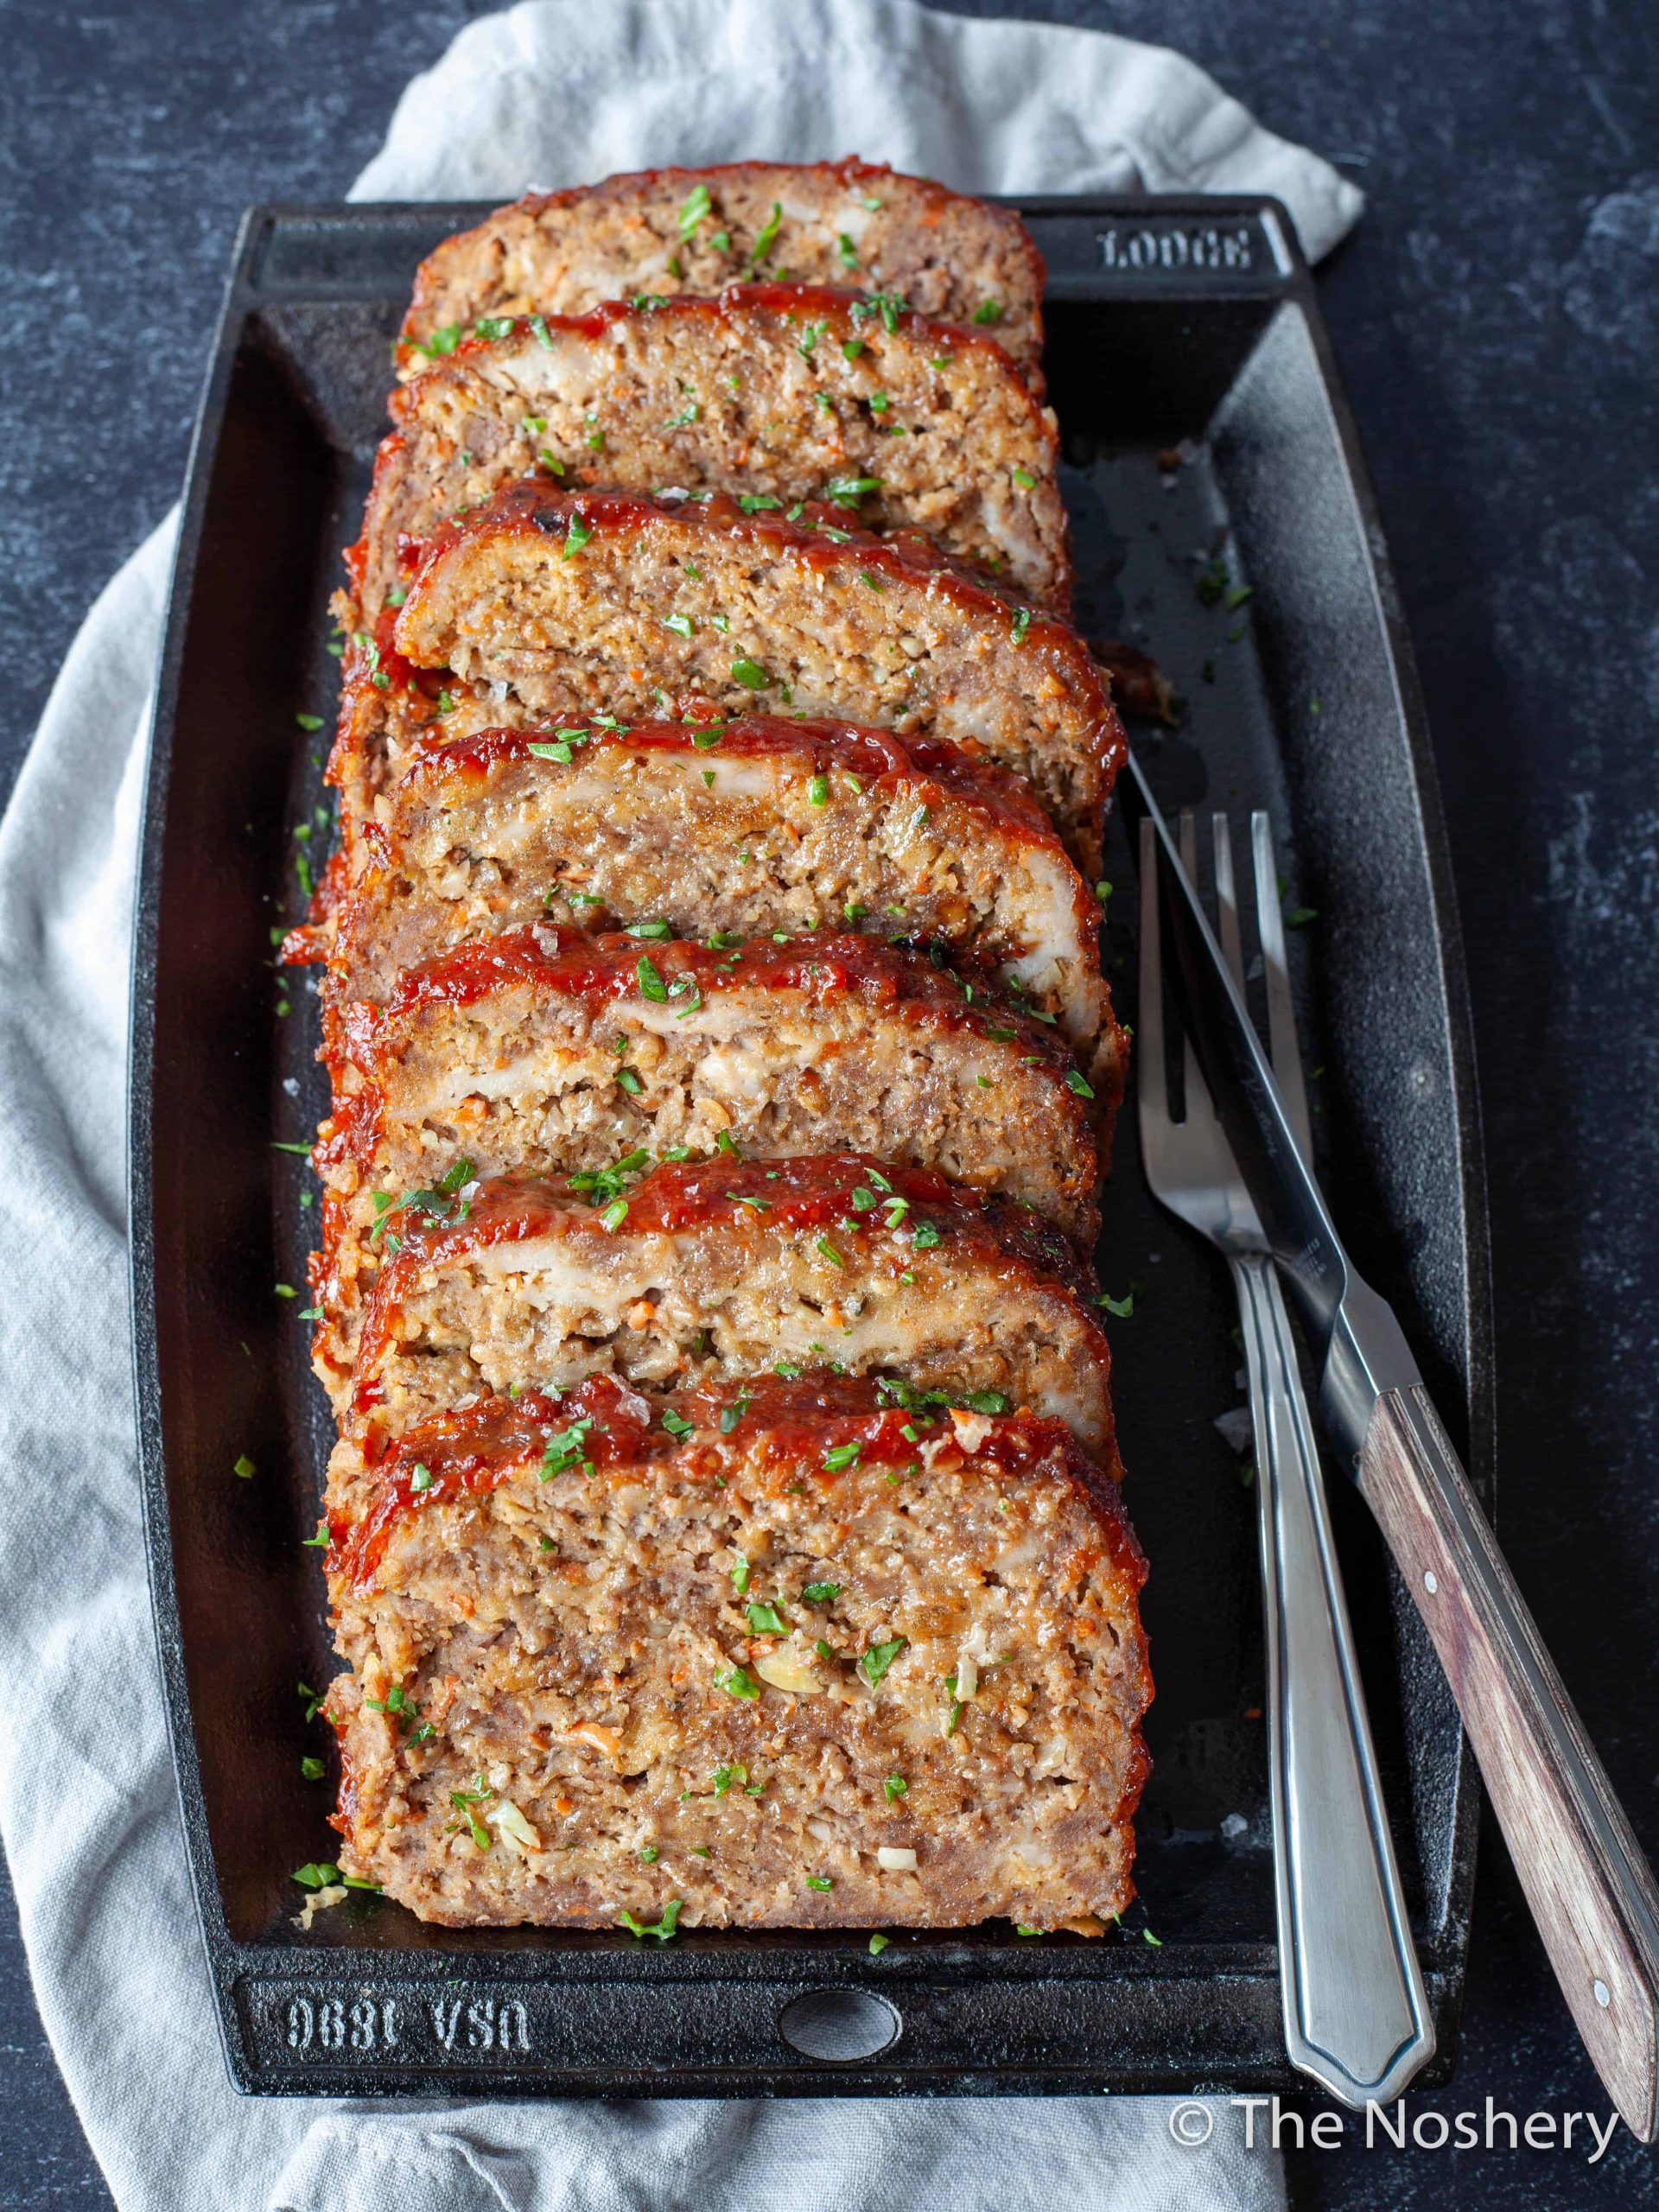 Slow Cooker Lipton Onion Meatloaf - The Magical Slow Cooker